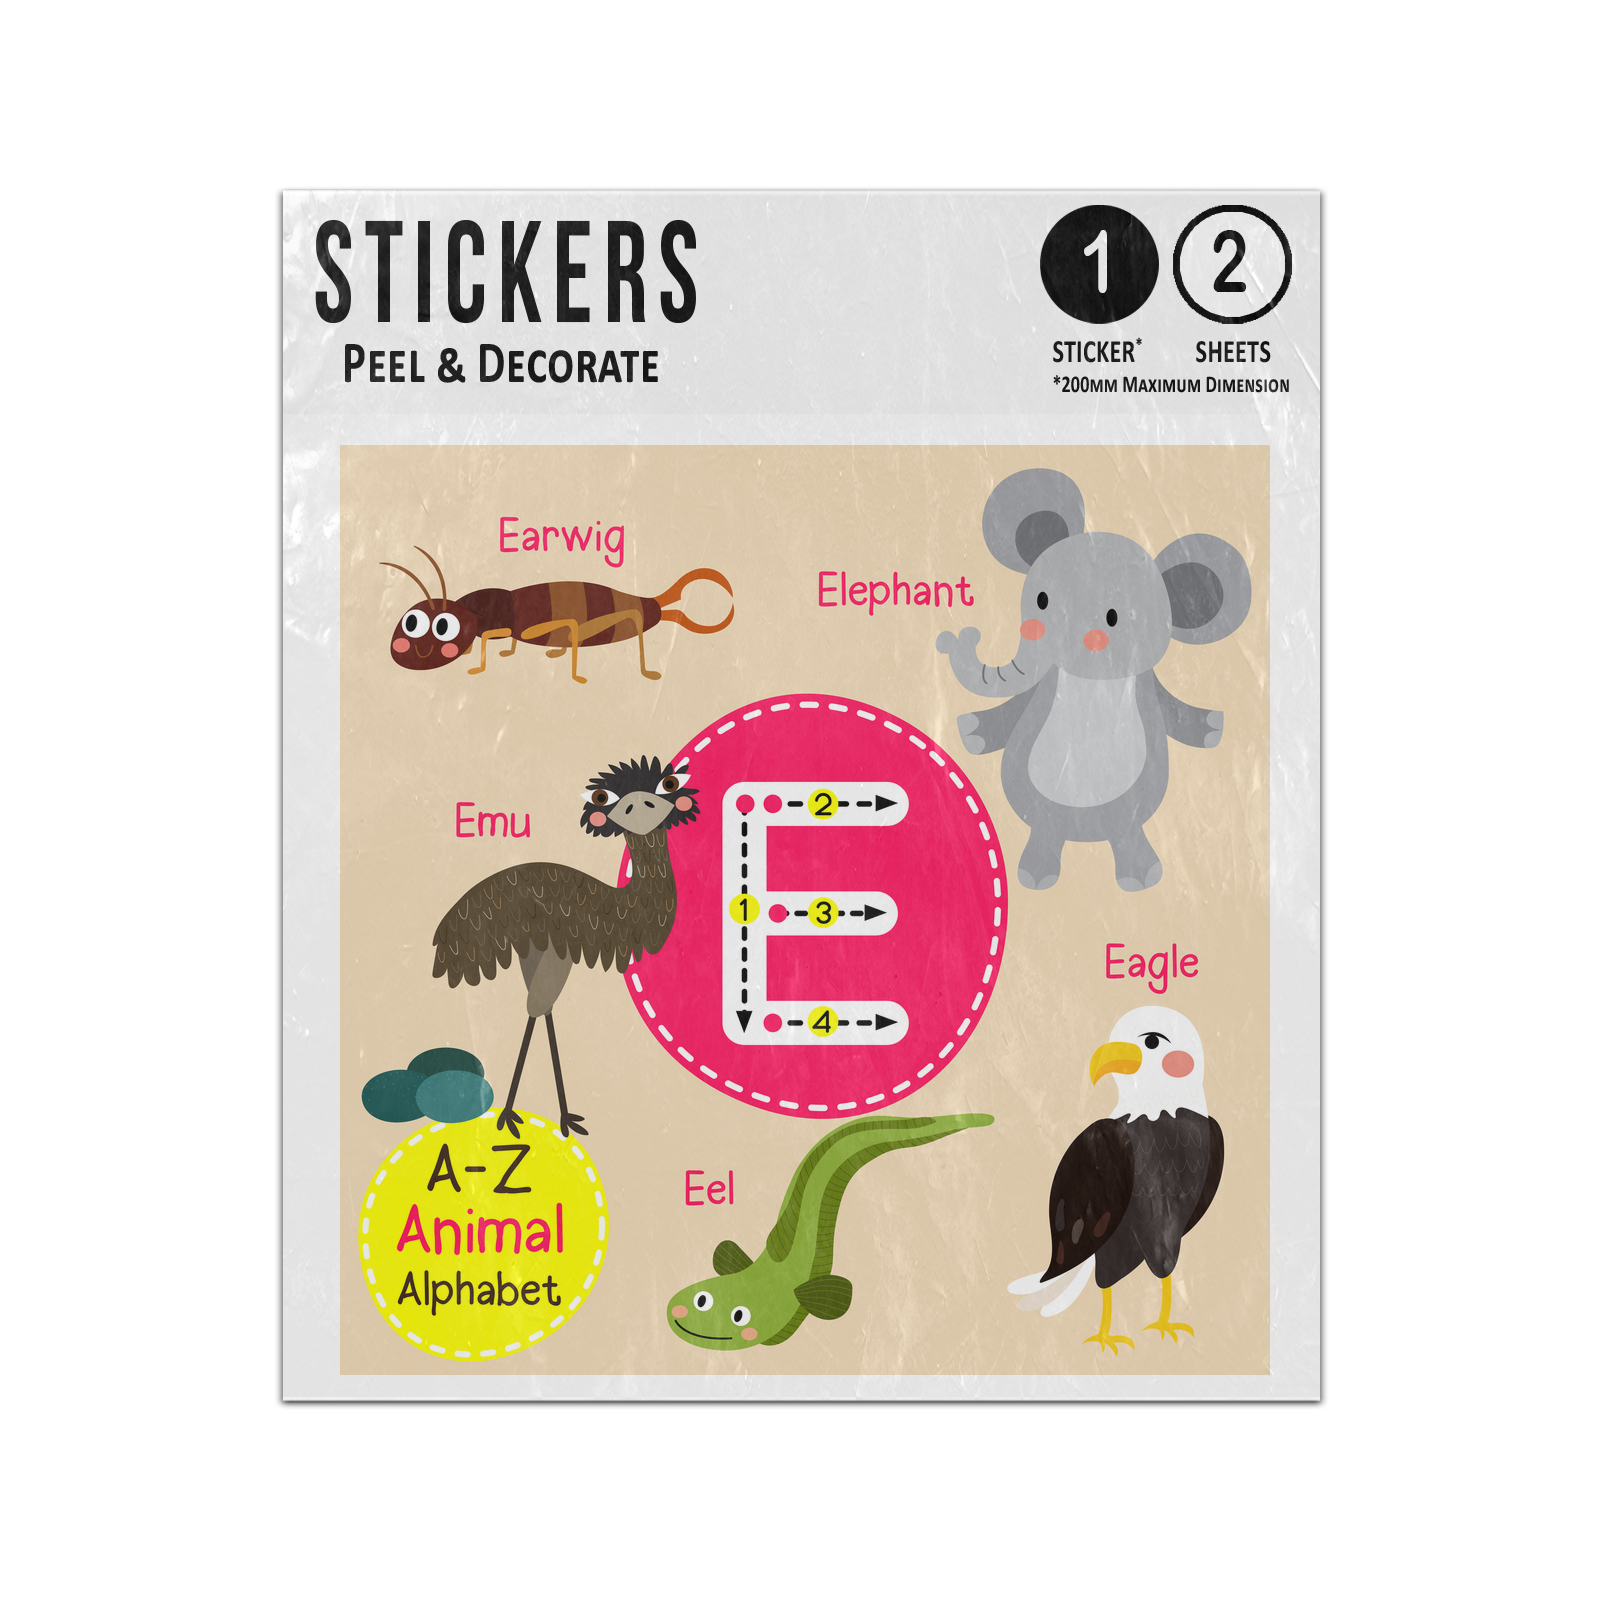 A Z Animal Alphabet Cartoon Characters Letter E Sticker Sheets Twin Pack  Learn Alphabet. Imprintable